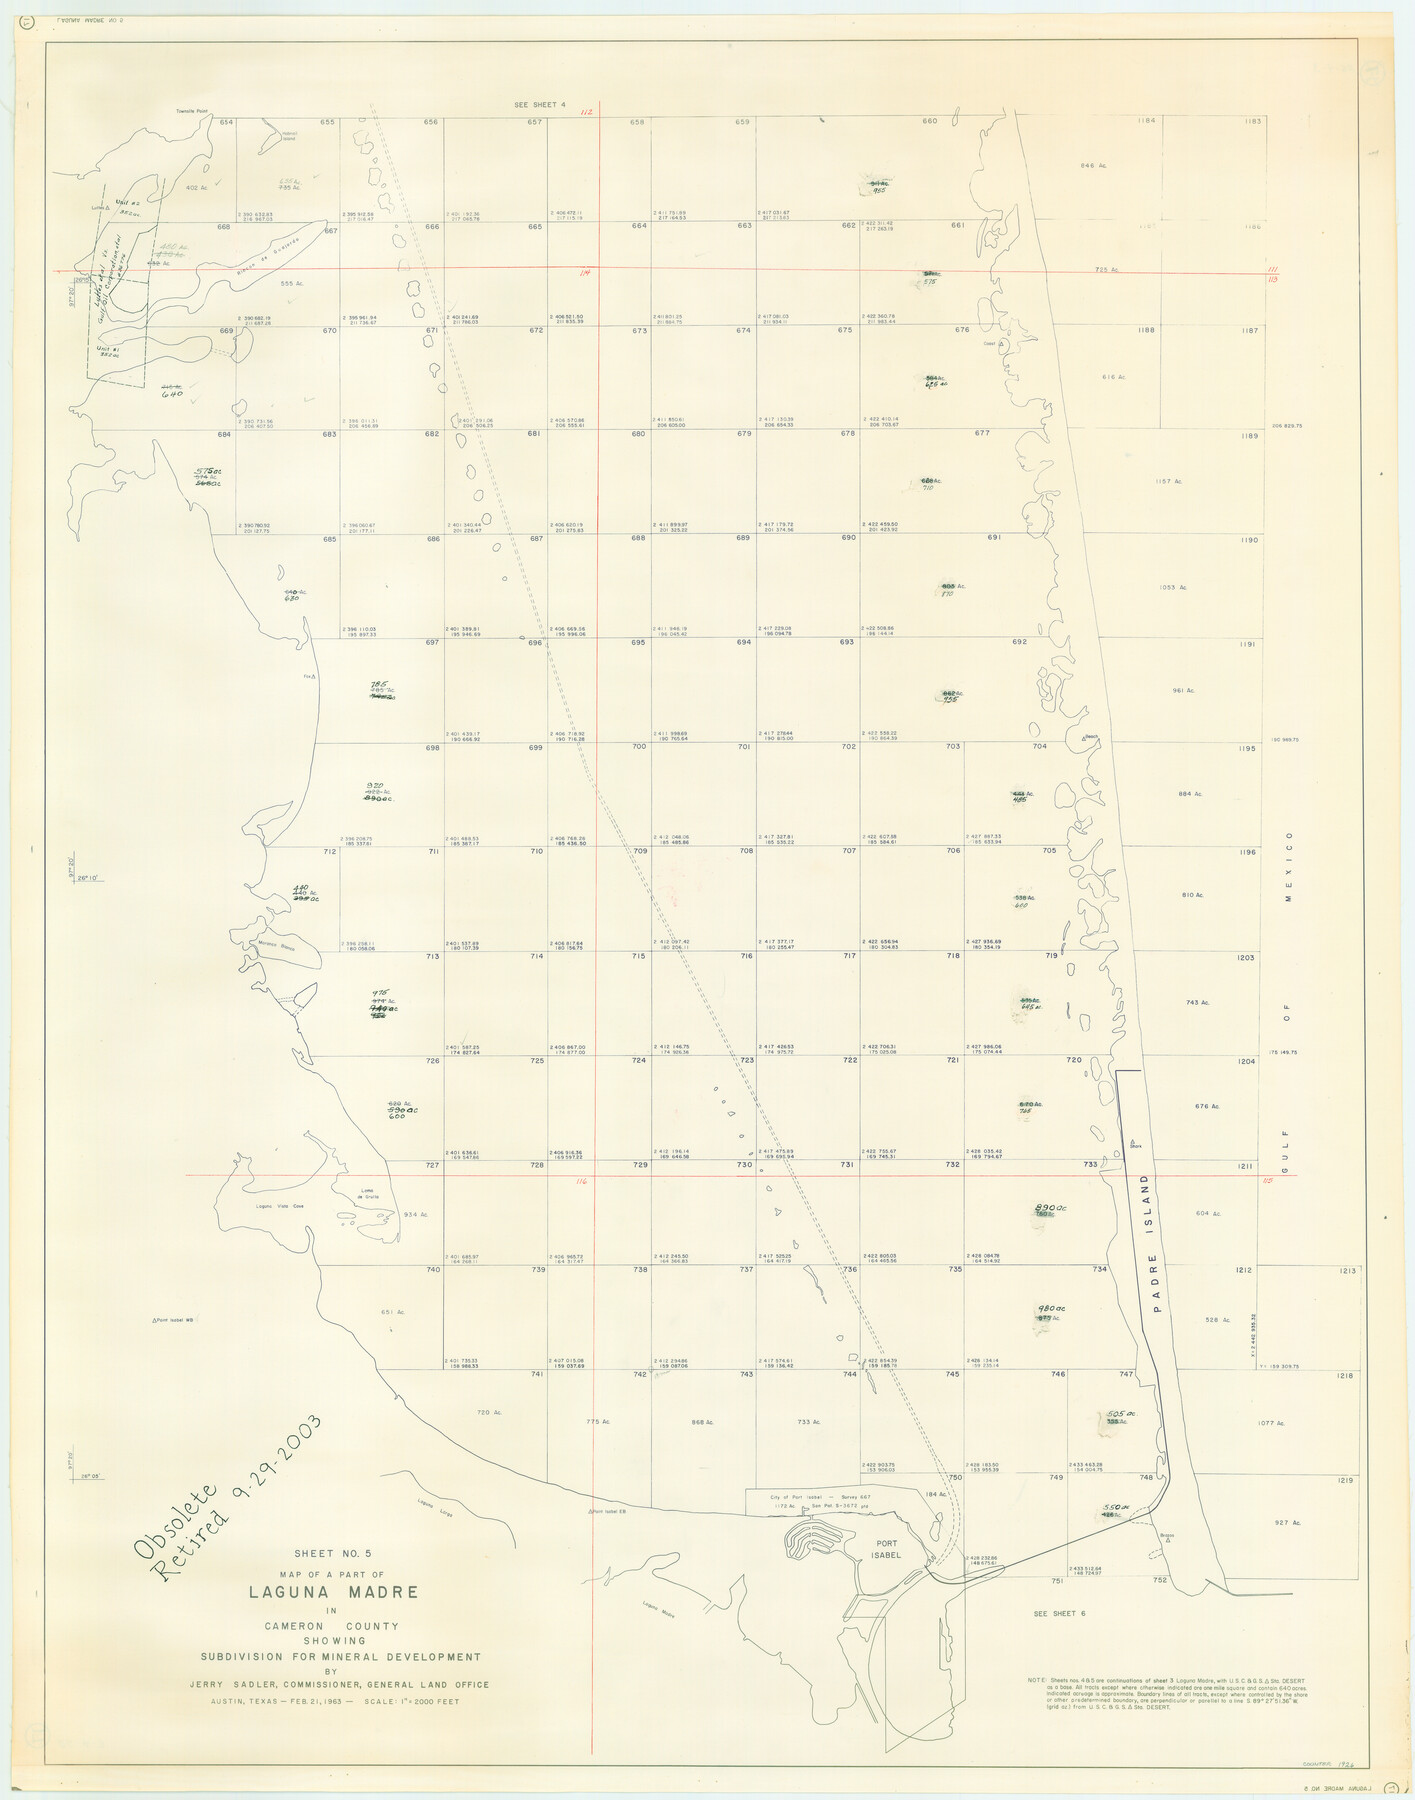 1926, Part of Laguna Madre in Cameron County, showing Subdivision for Mineral Development, General Map Collection